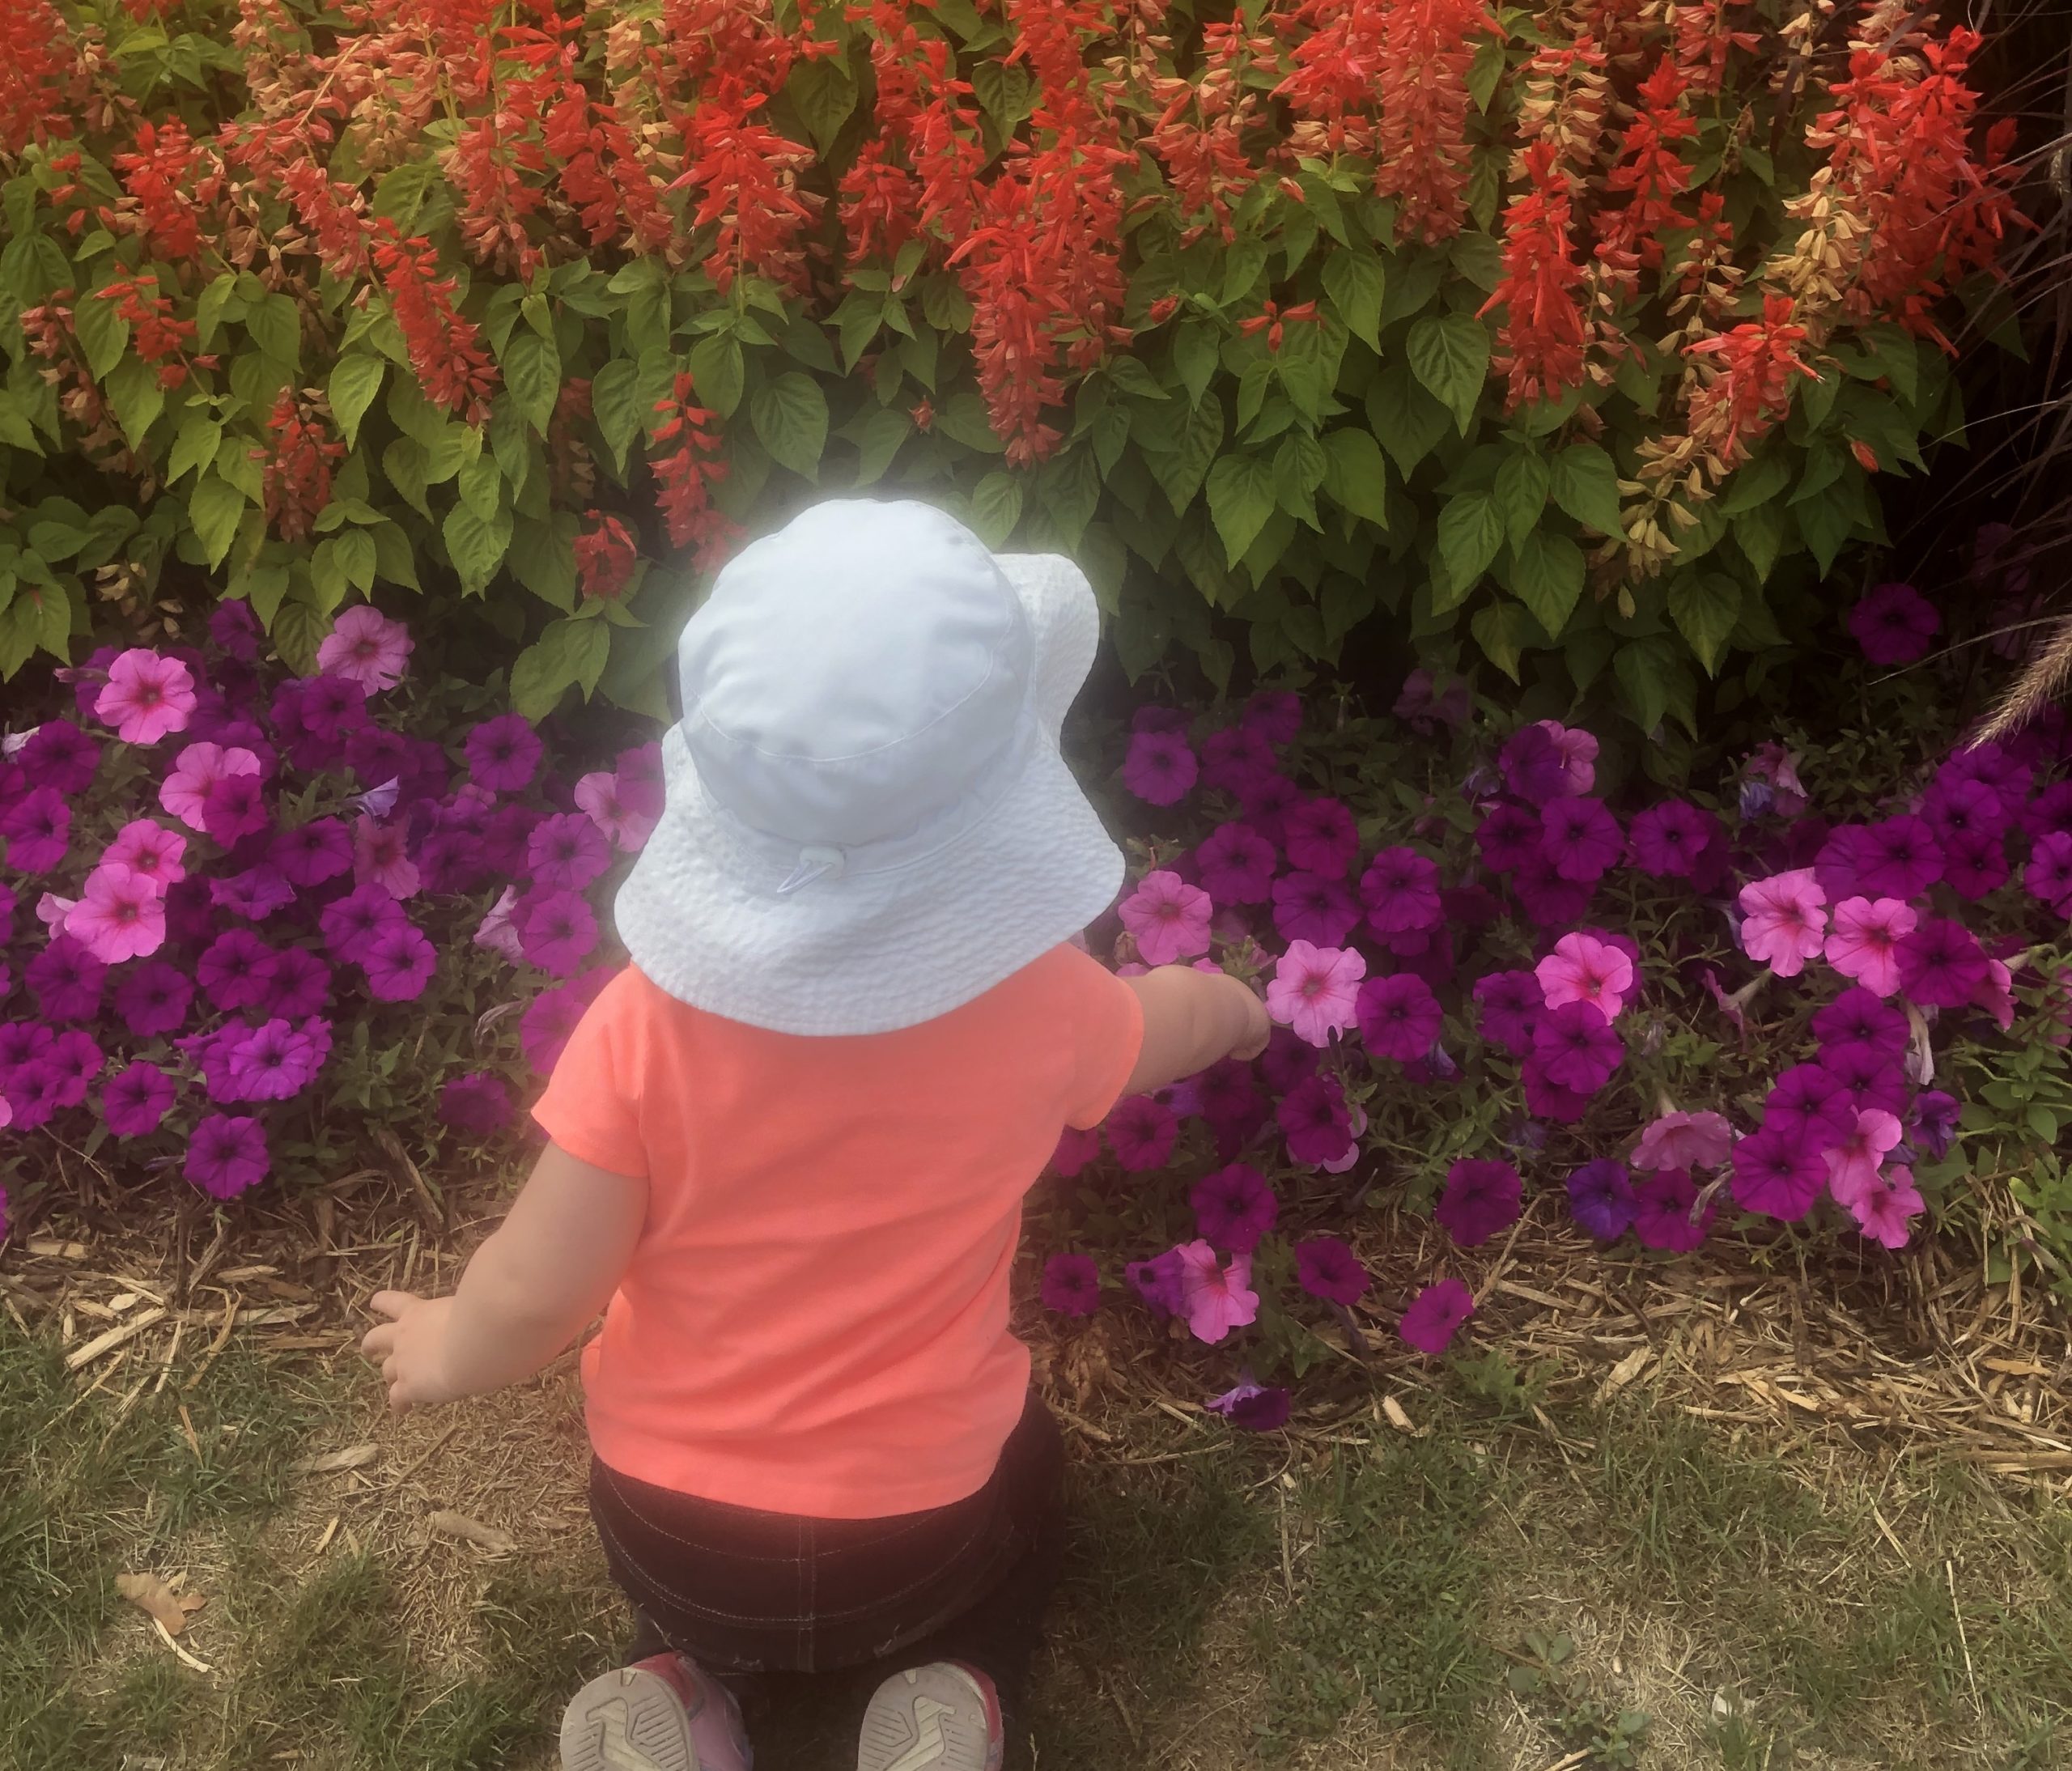 Exploring nature and learning about bees through my toddler's eyes.